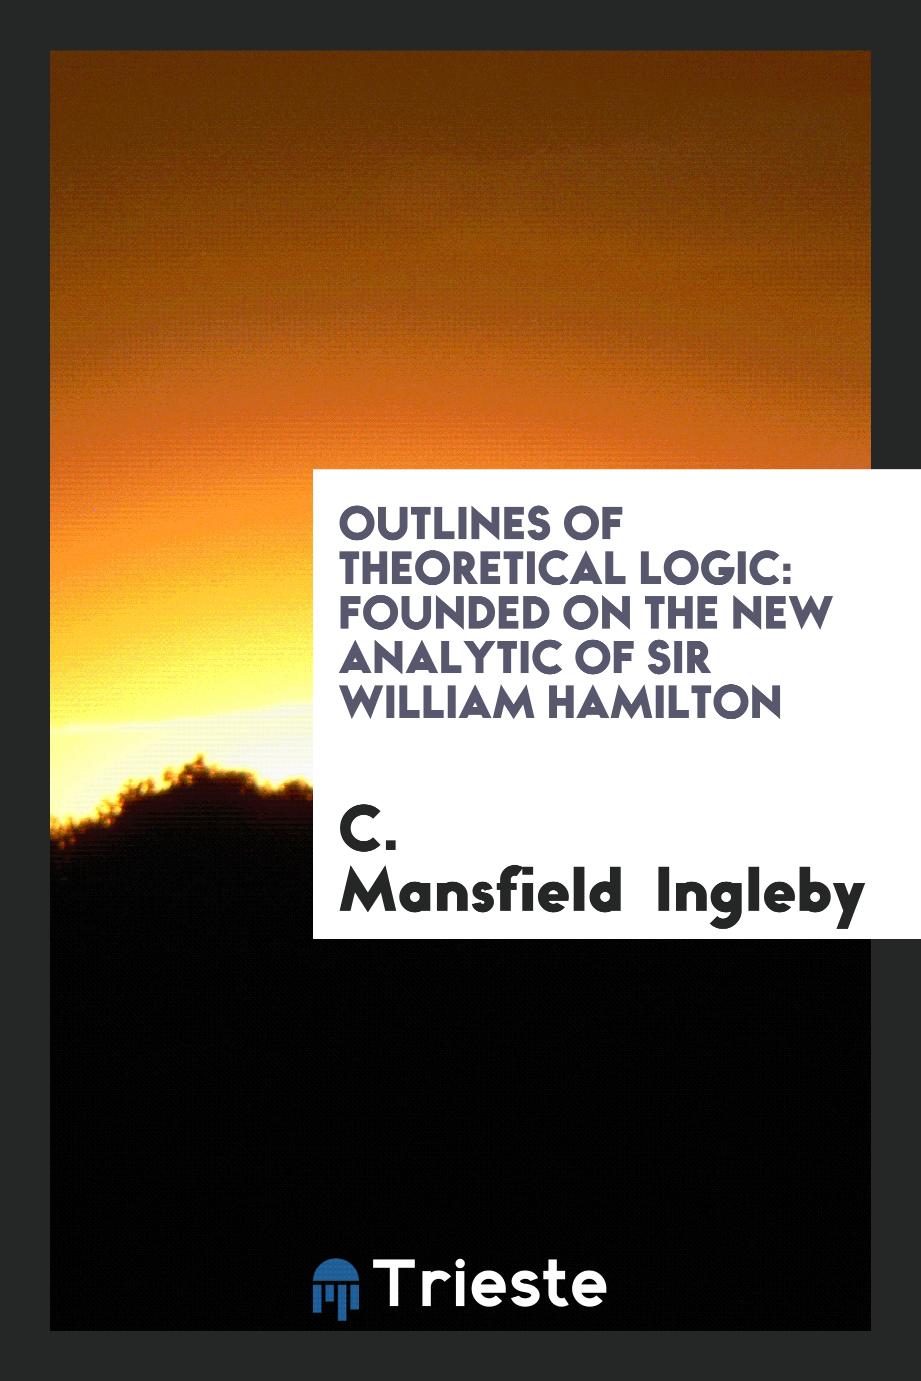 Outlines of Theoretical Logic: Founded on the New Analytic of Sir William Hamilton - C. Mansfield Ingleby